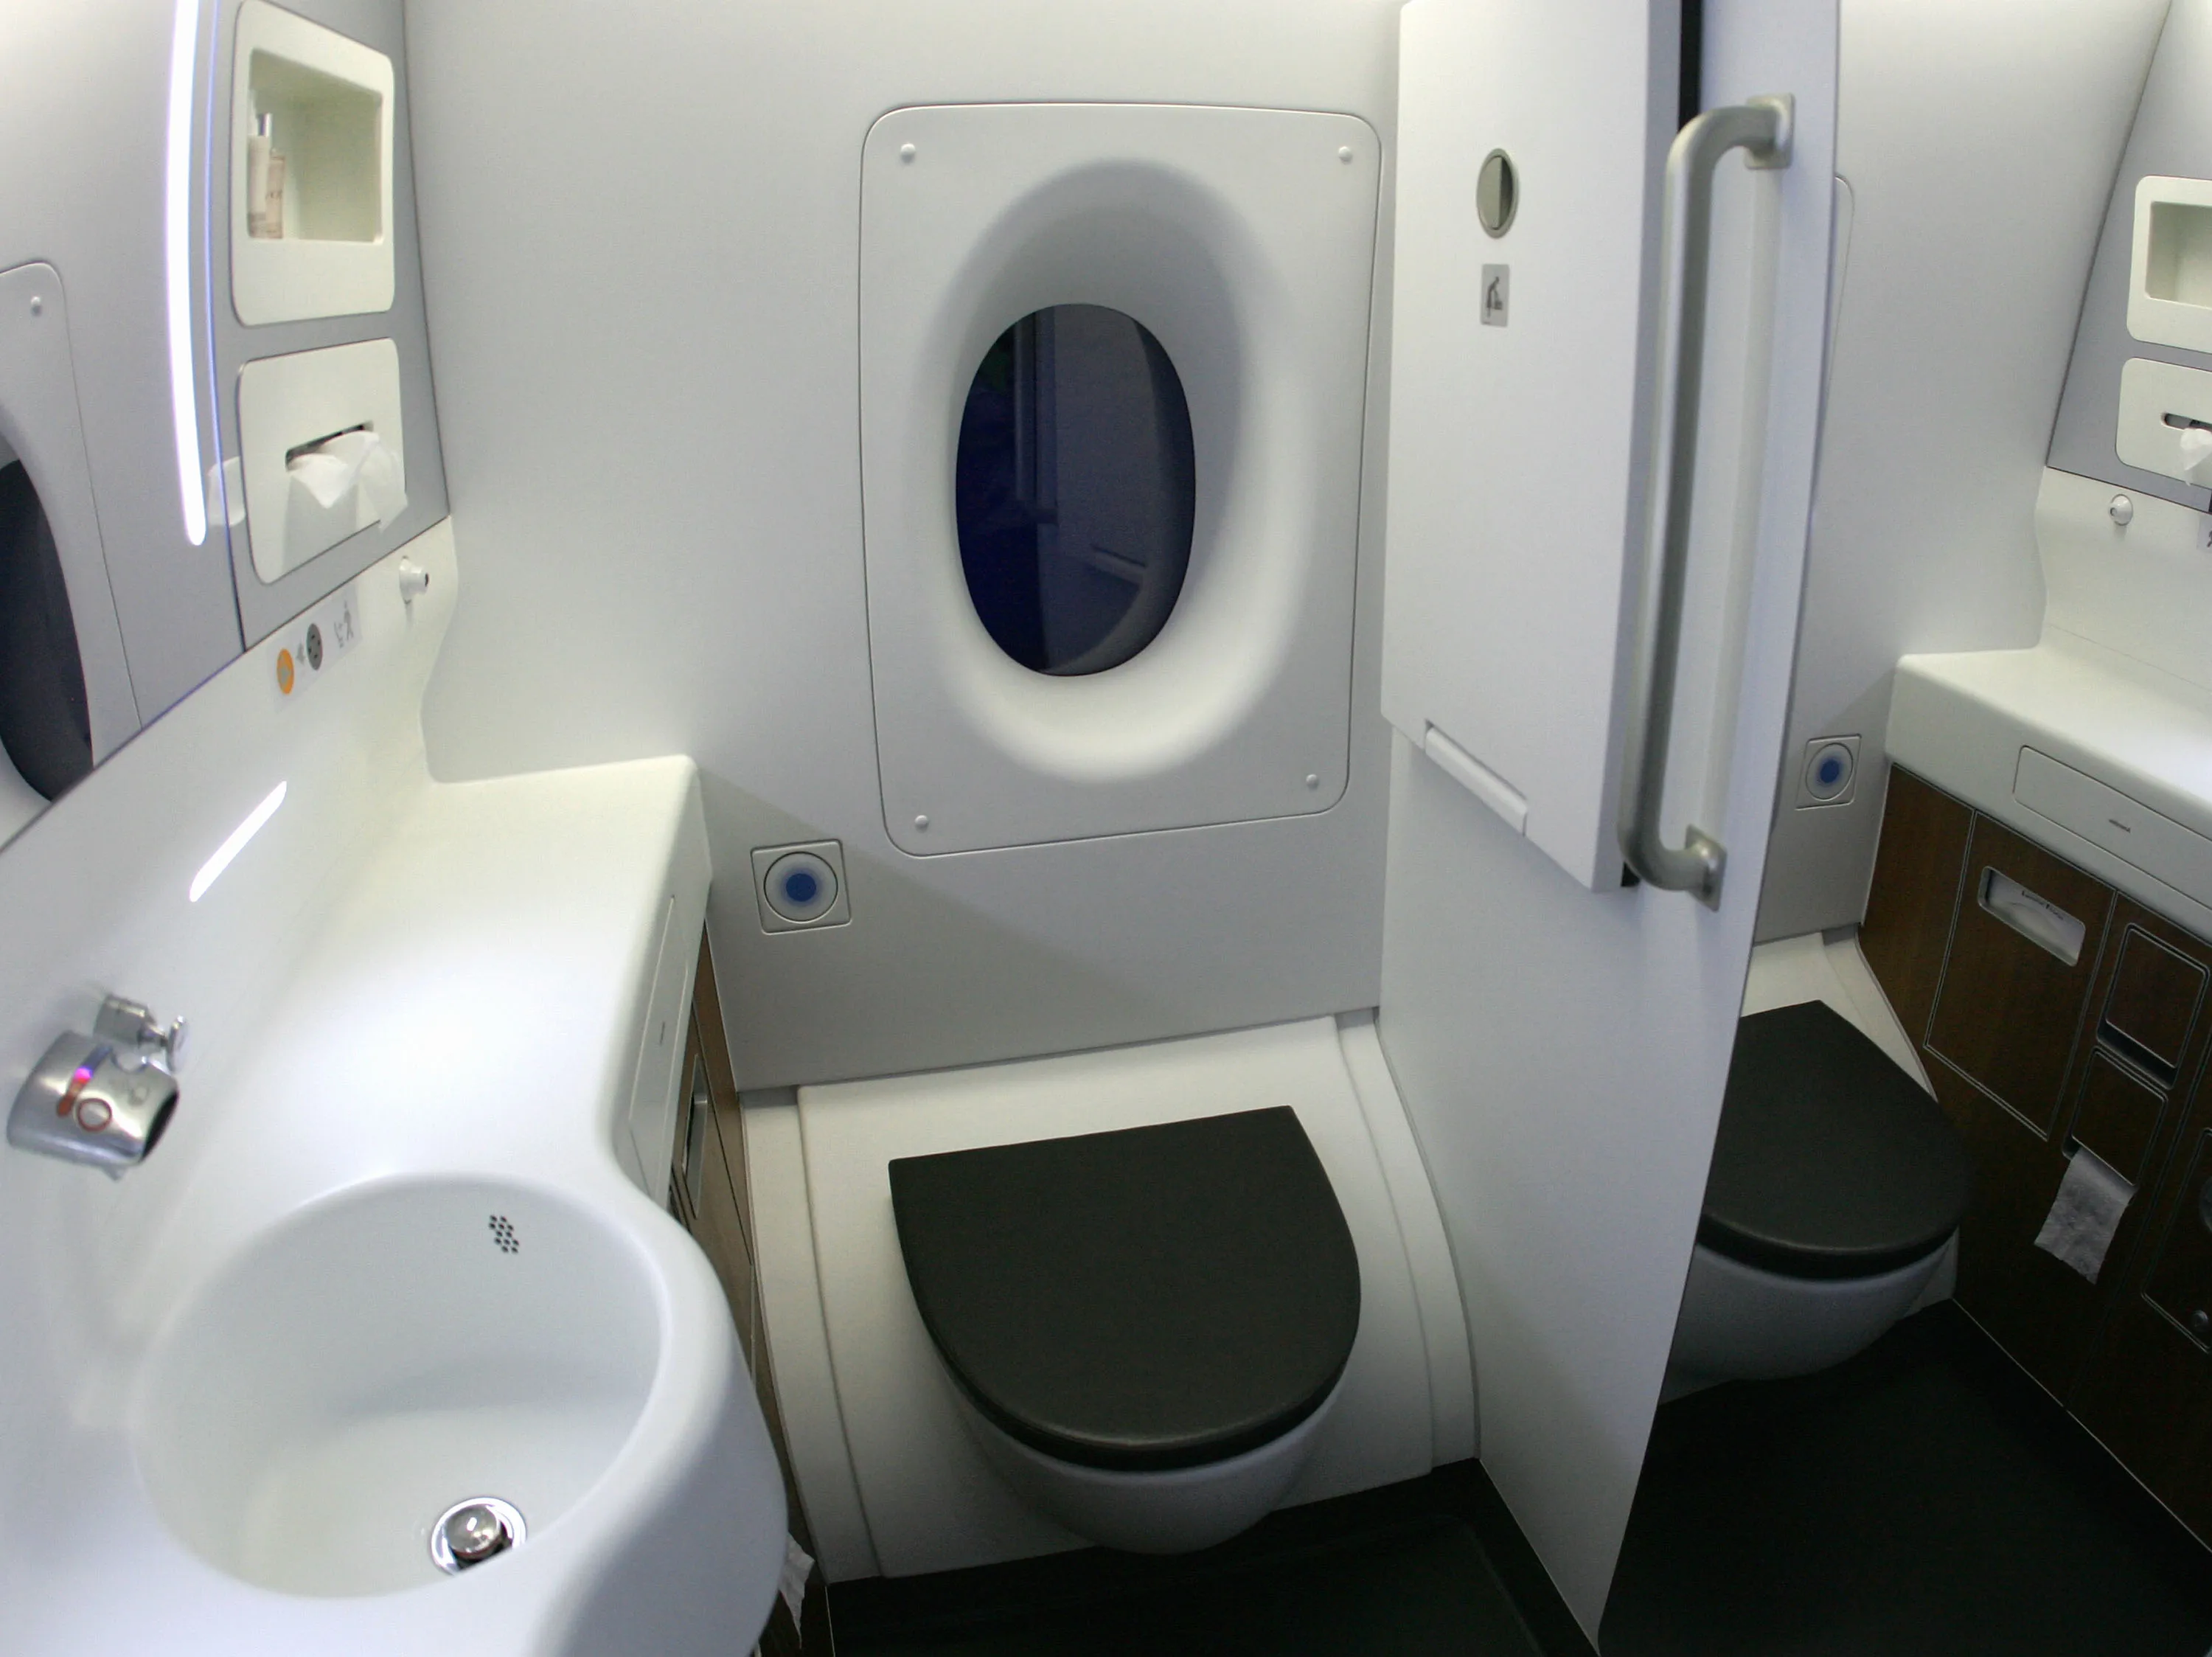 Bill in Congress Would Prevent Airlines from Charging Fees for the Bathroom